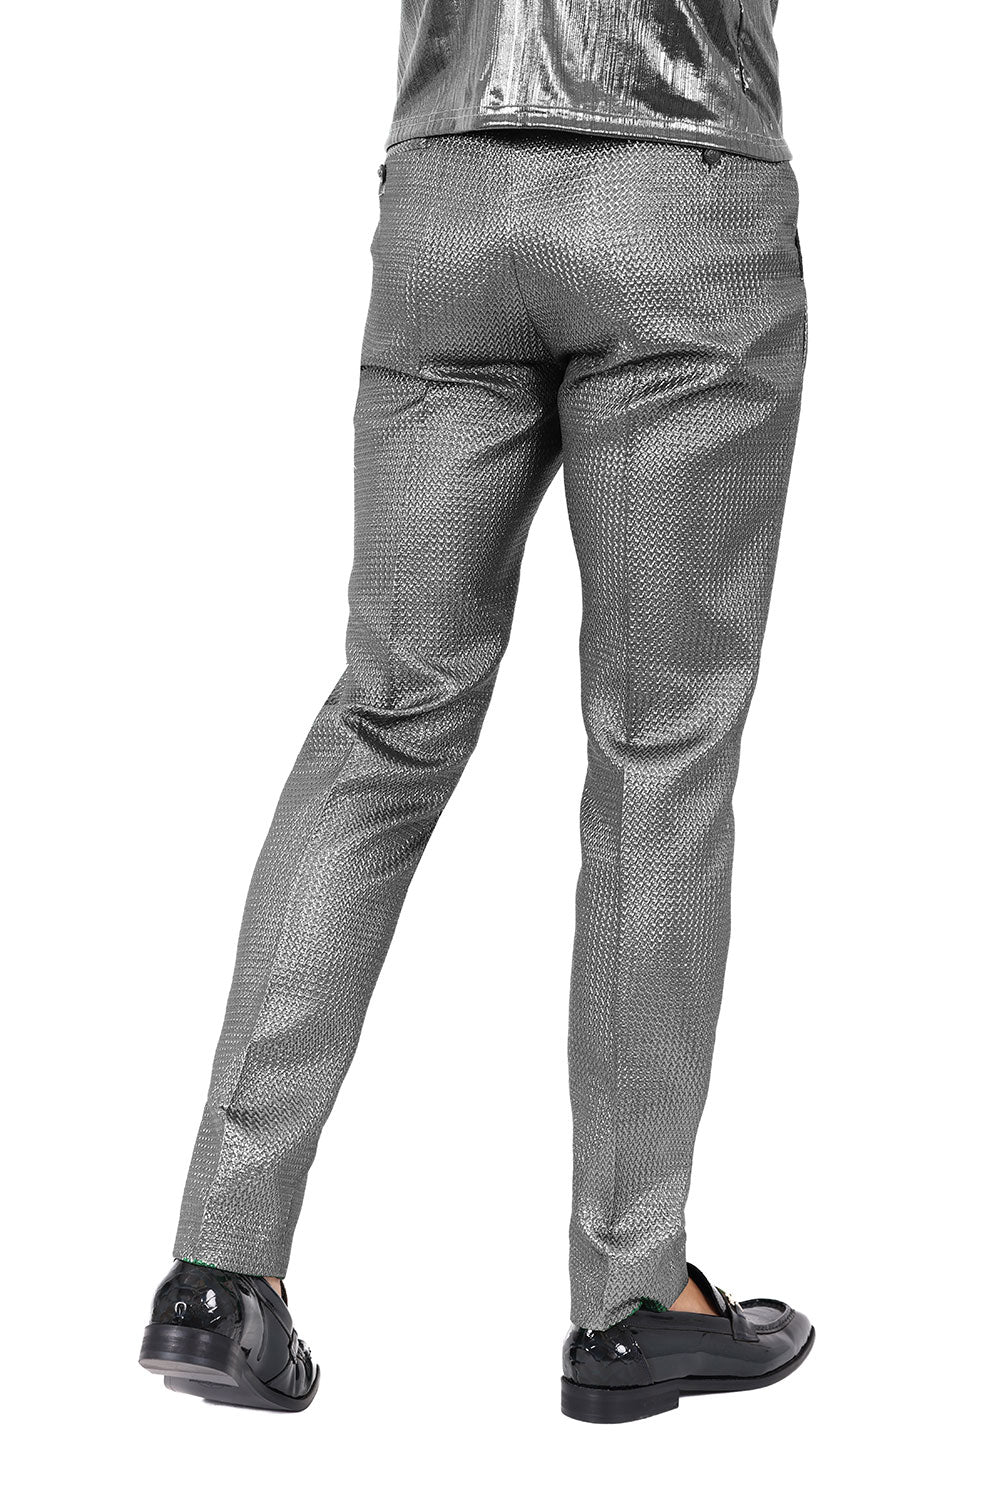 Barabas Men's Solid Vibrant Color Luxury Chino Pants 2cp3105 Silver